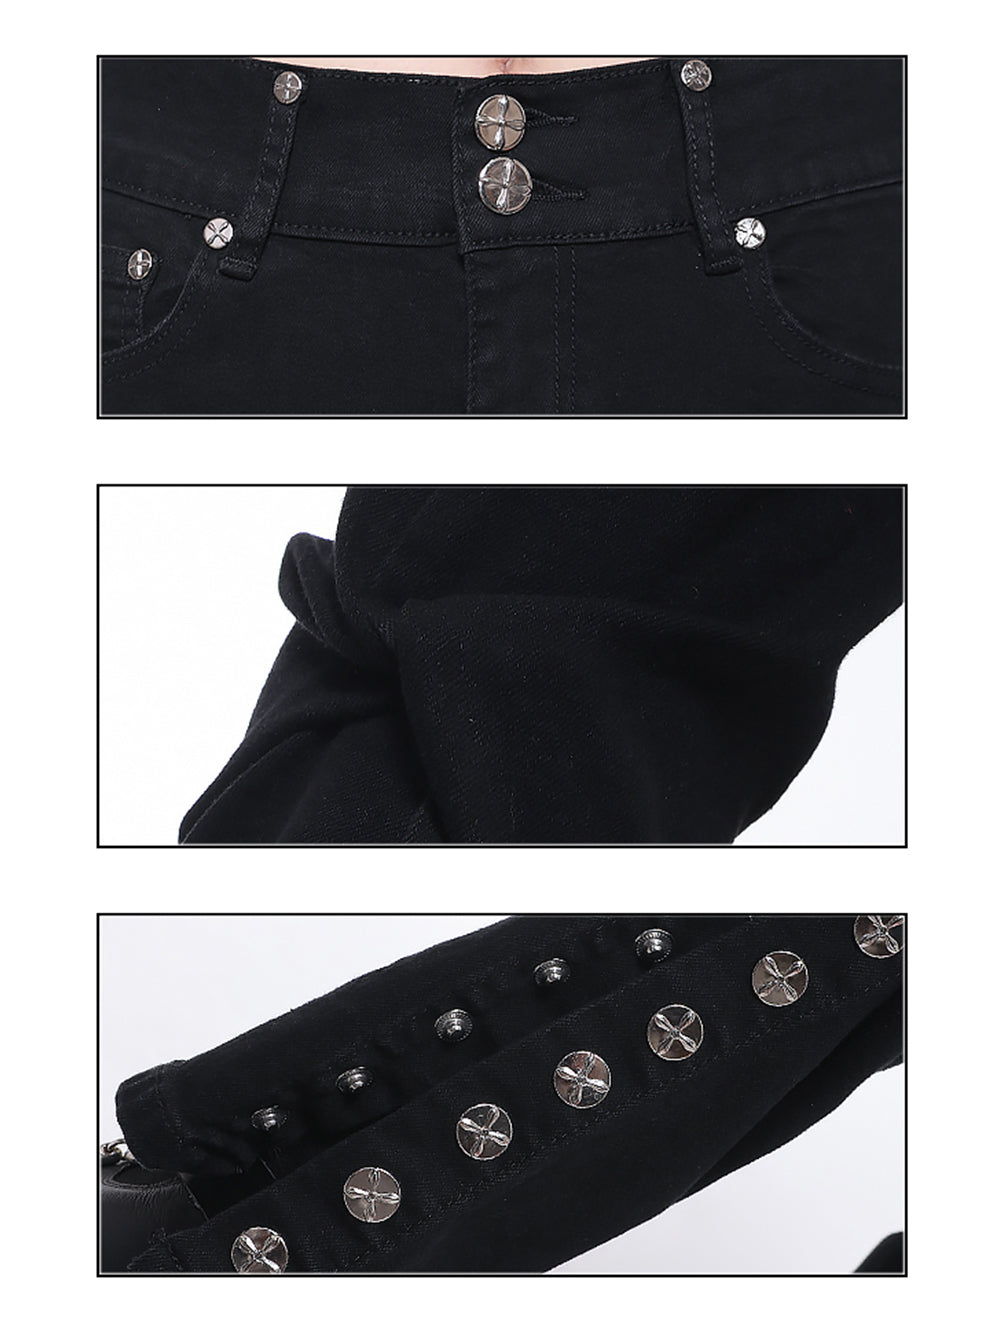 MUKTANK×CUUDICLAB Button Decorated Twisted Jeans